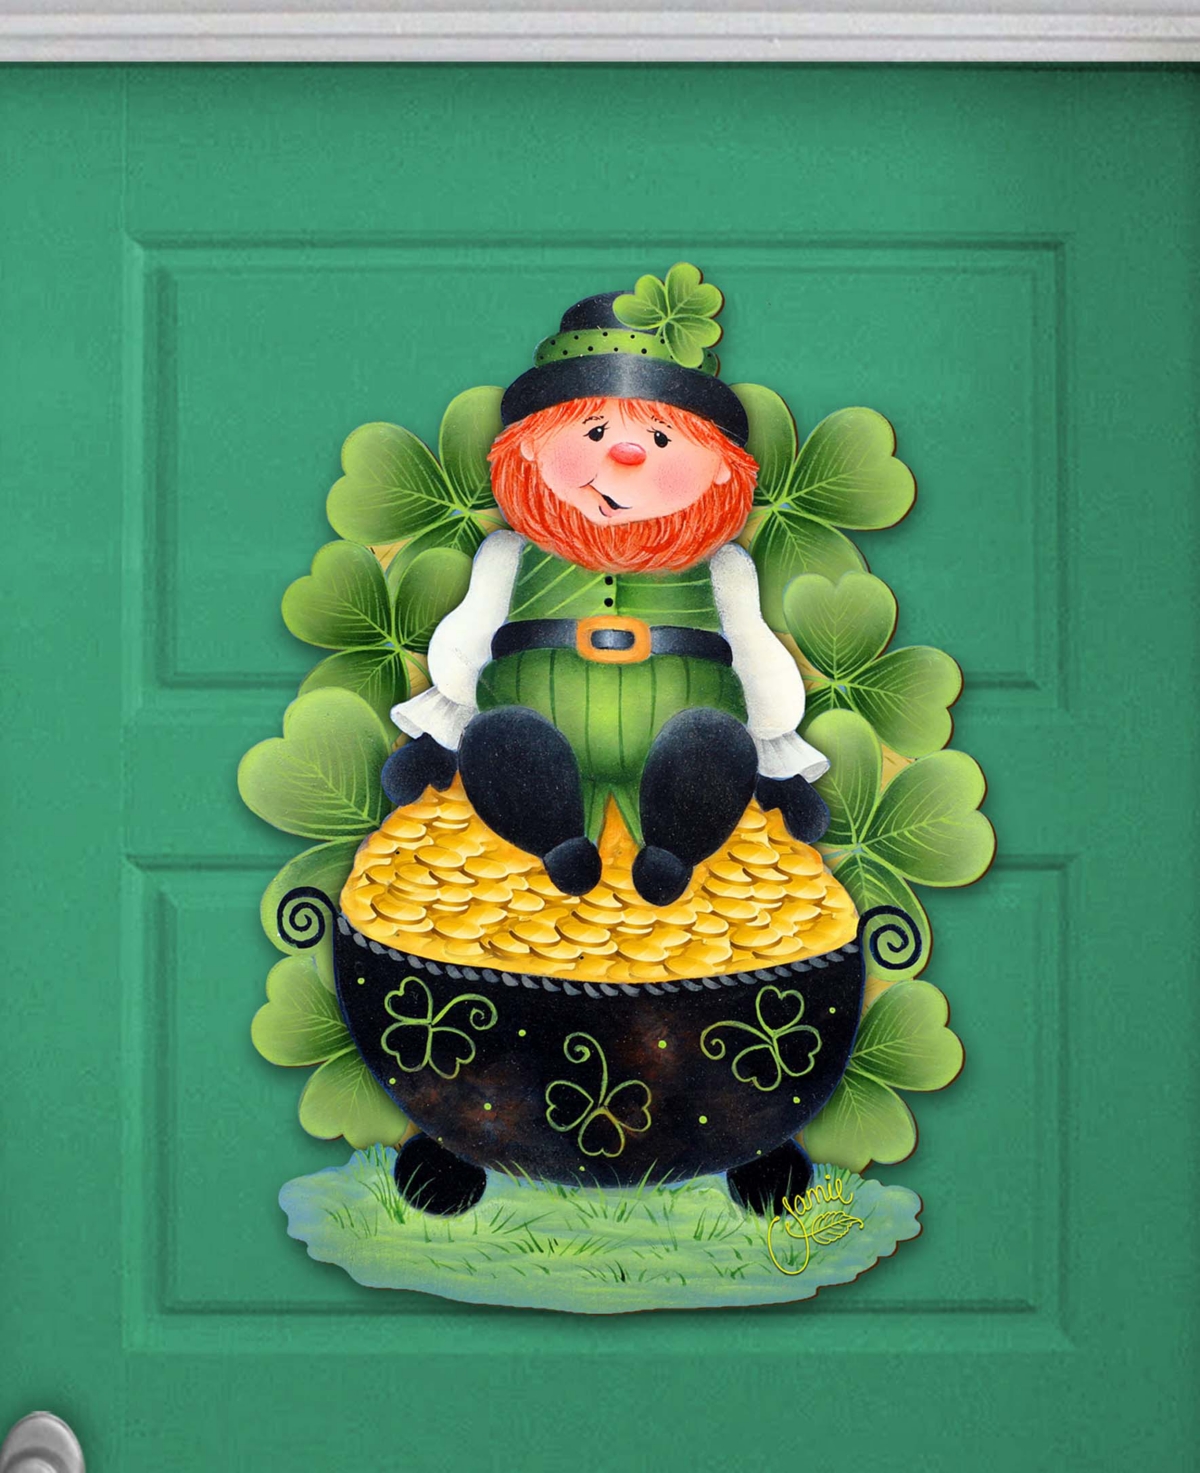 Designocracy Holiday Wooden Wall Decor Door Decor Lepricon's Pot Full Of Gold J. Mills-price In Multi Color